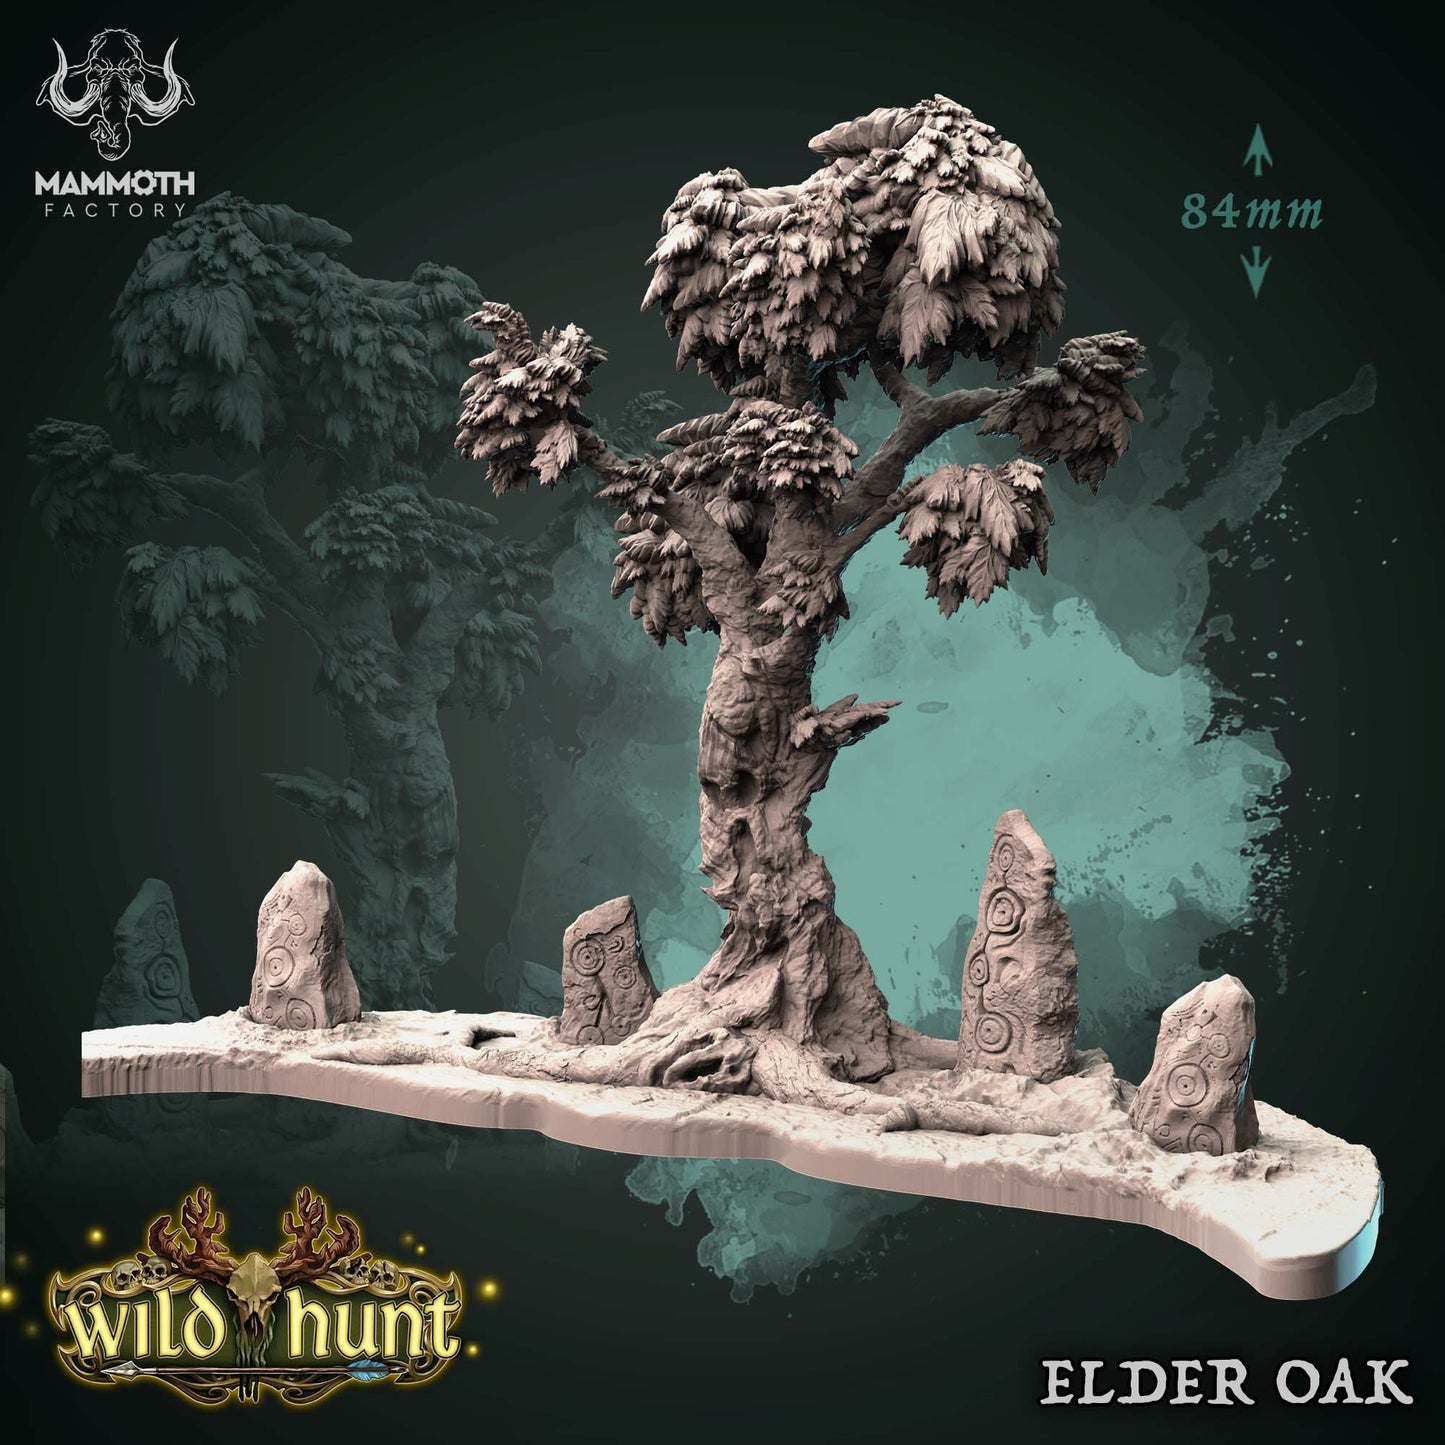 Elder Oak | Mammoth Factory | 3D Printed Resin Miniature | Dungeons and Dragons | Pathfinder | Tabletop Role Playing | AoS |D&D